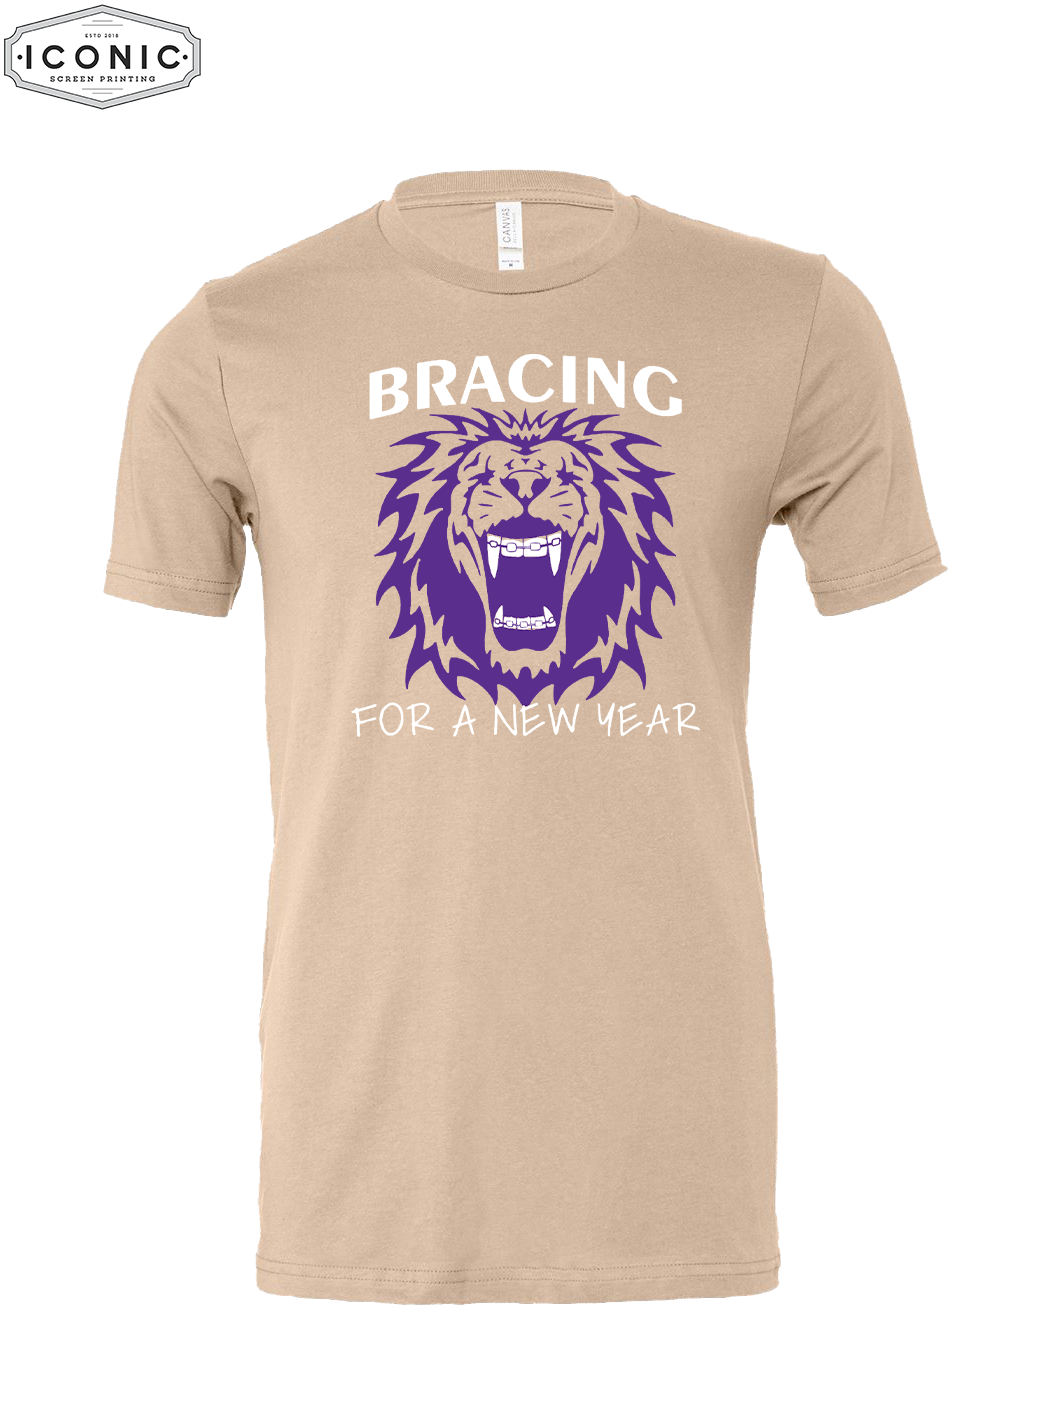 Bracing for a New Year - D4 - Bella+Canvas-Unisex Jersey Tee